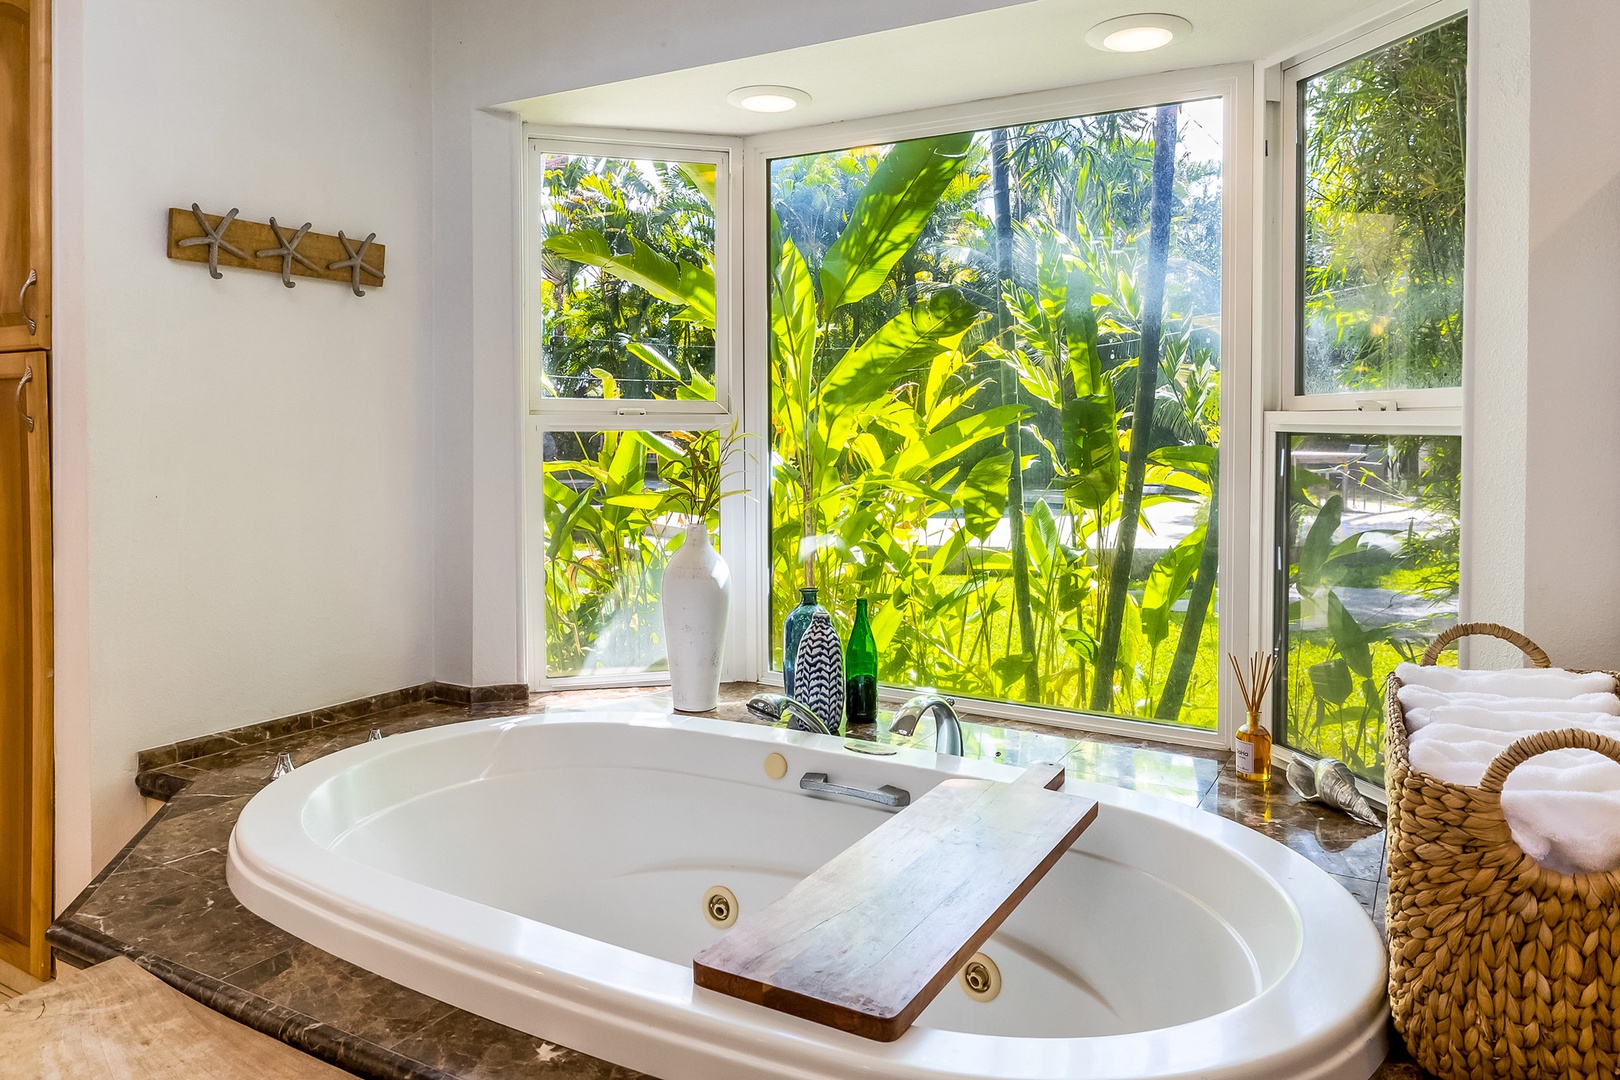 Honolulu Vacation Rentals, Hale Ho'omaha - Plus, there's beautiful views of the lush, tropical greenery offering serenity